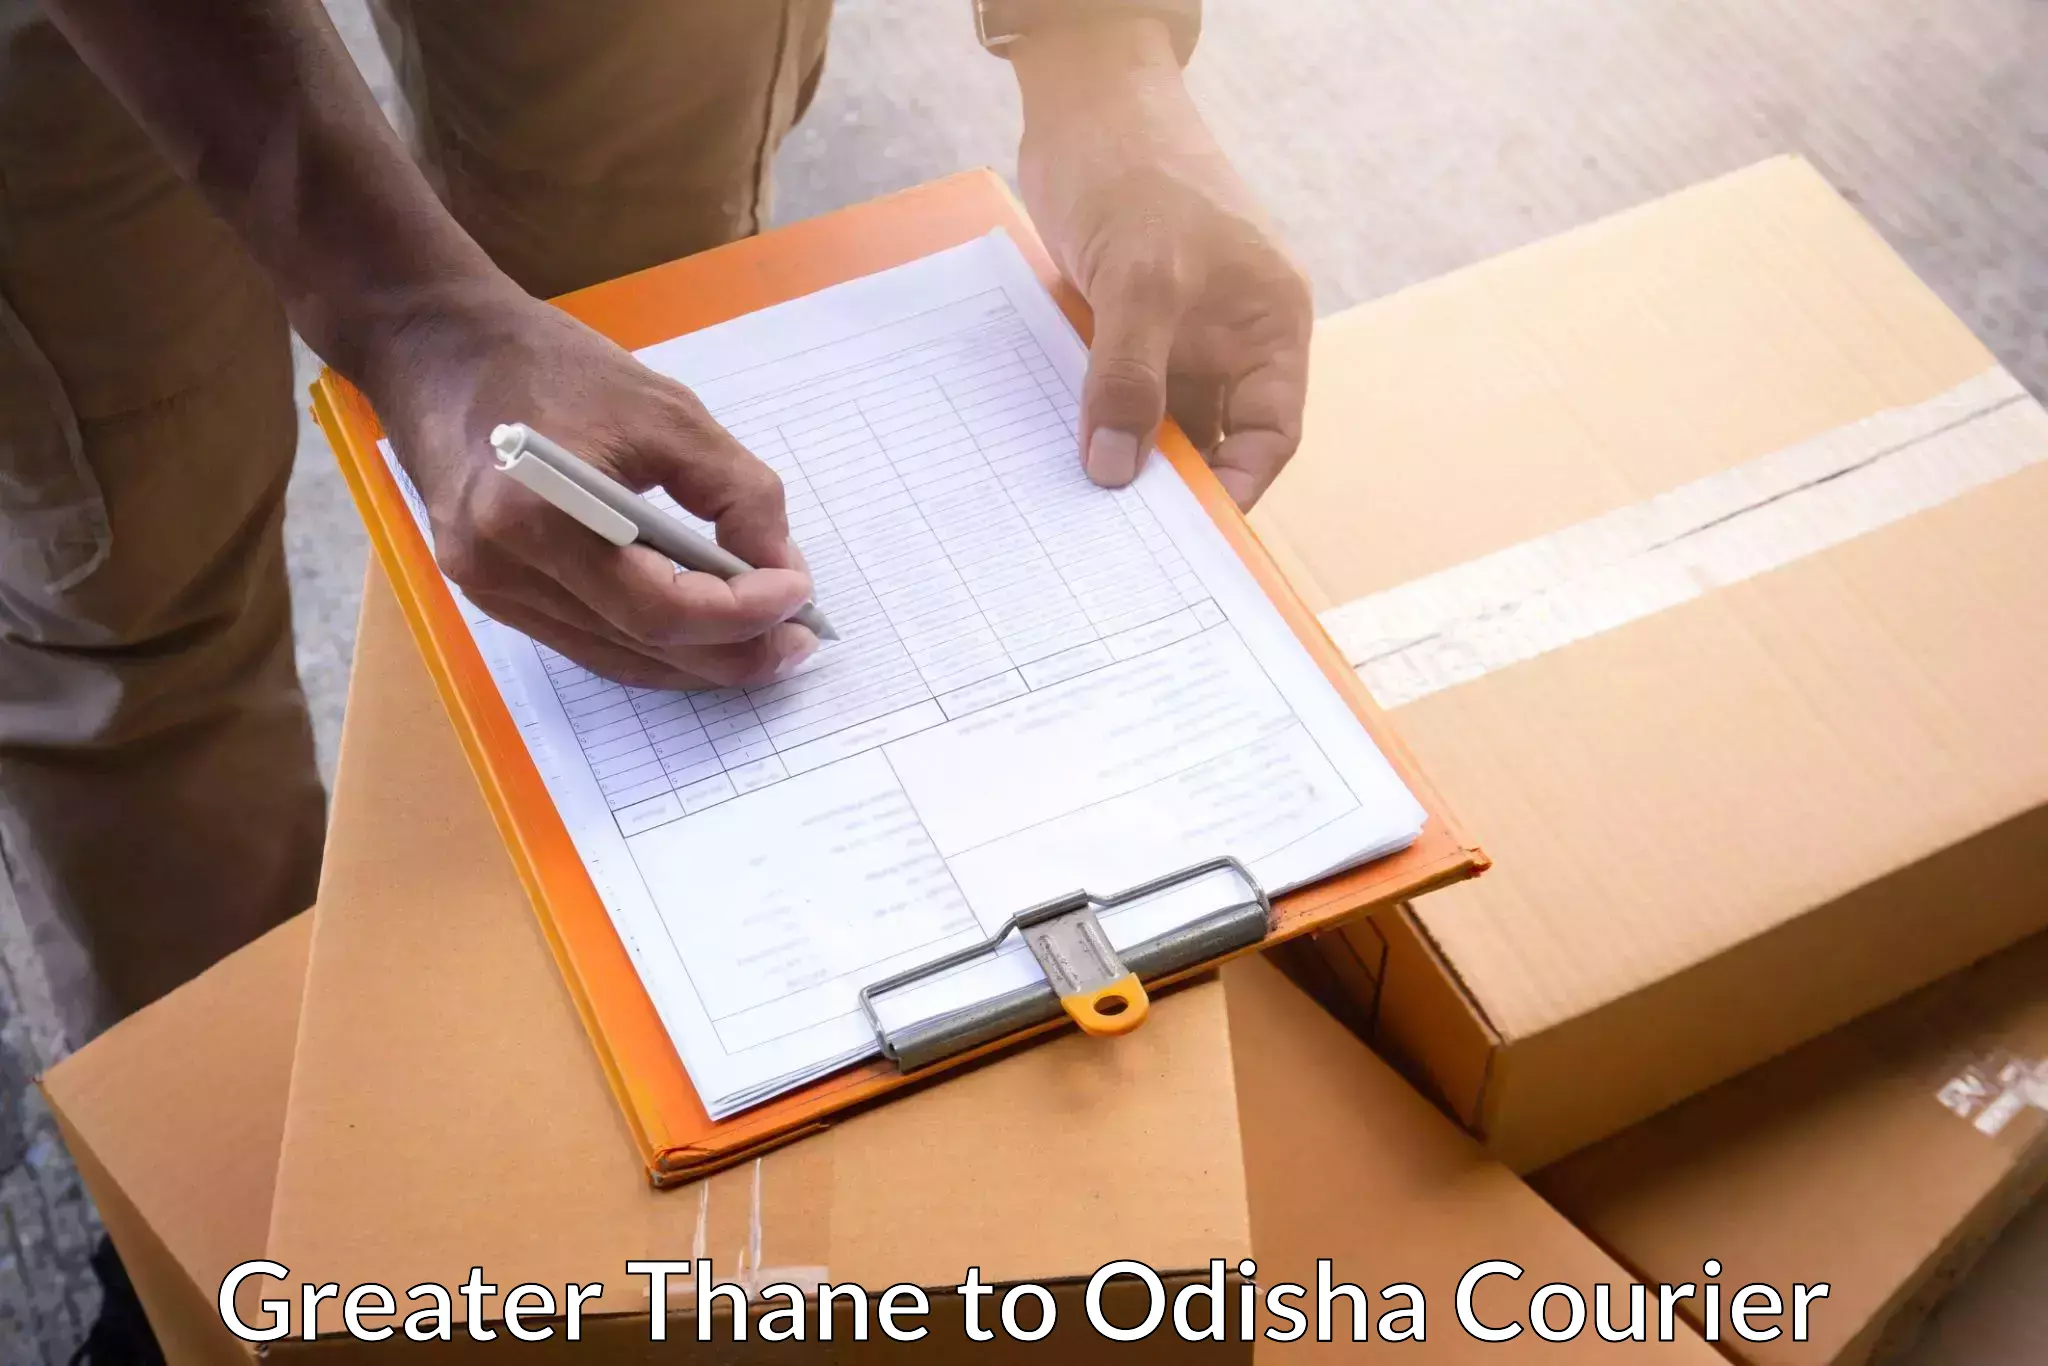 User-friendly delivery service Greater Thane to Odisha